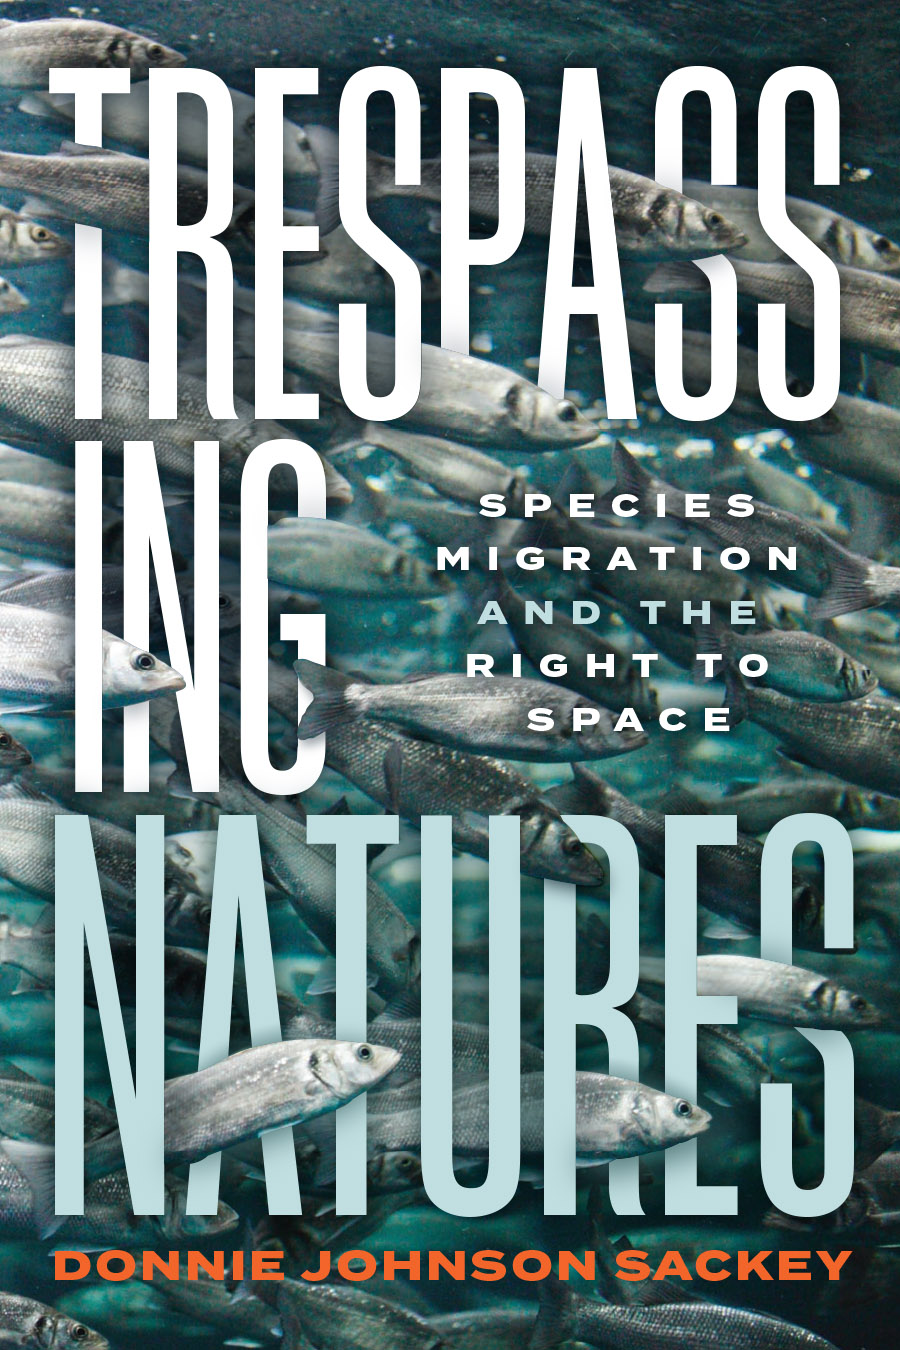 Front cover of Trespassing Natures: Species Migration and the Right to Space by Donnie Johnson Sackey, covered with an image of a school of mackerel, many of whom are poking in and out of the letters of the title.